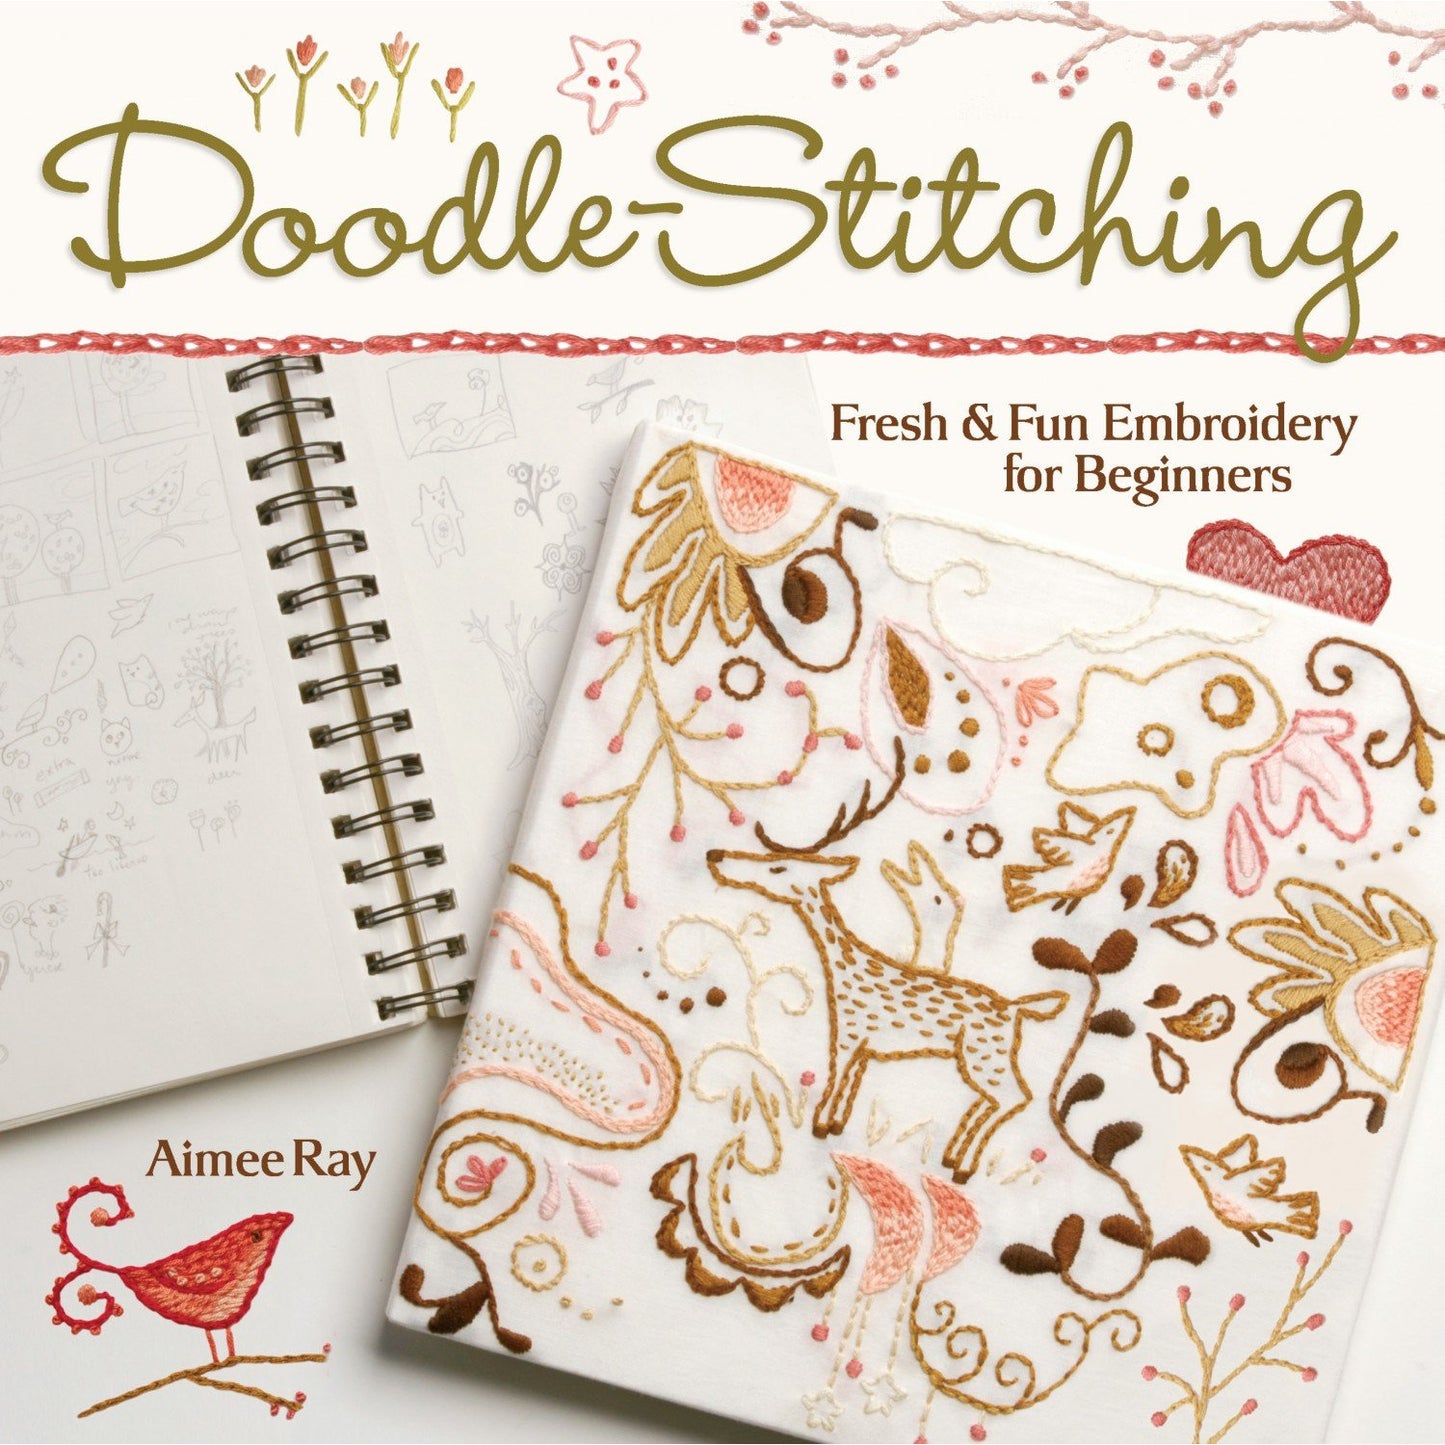 Doodle-Stitching ~ Fresh & Fun Embroidery for Beginners